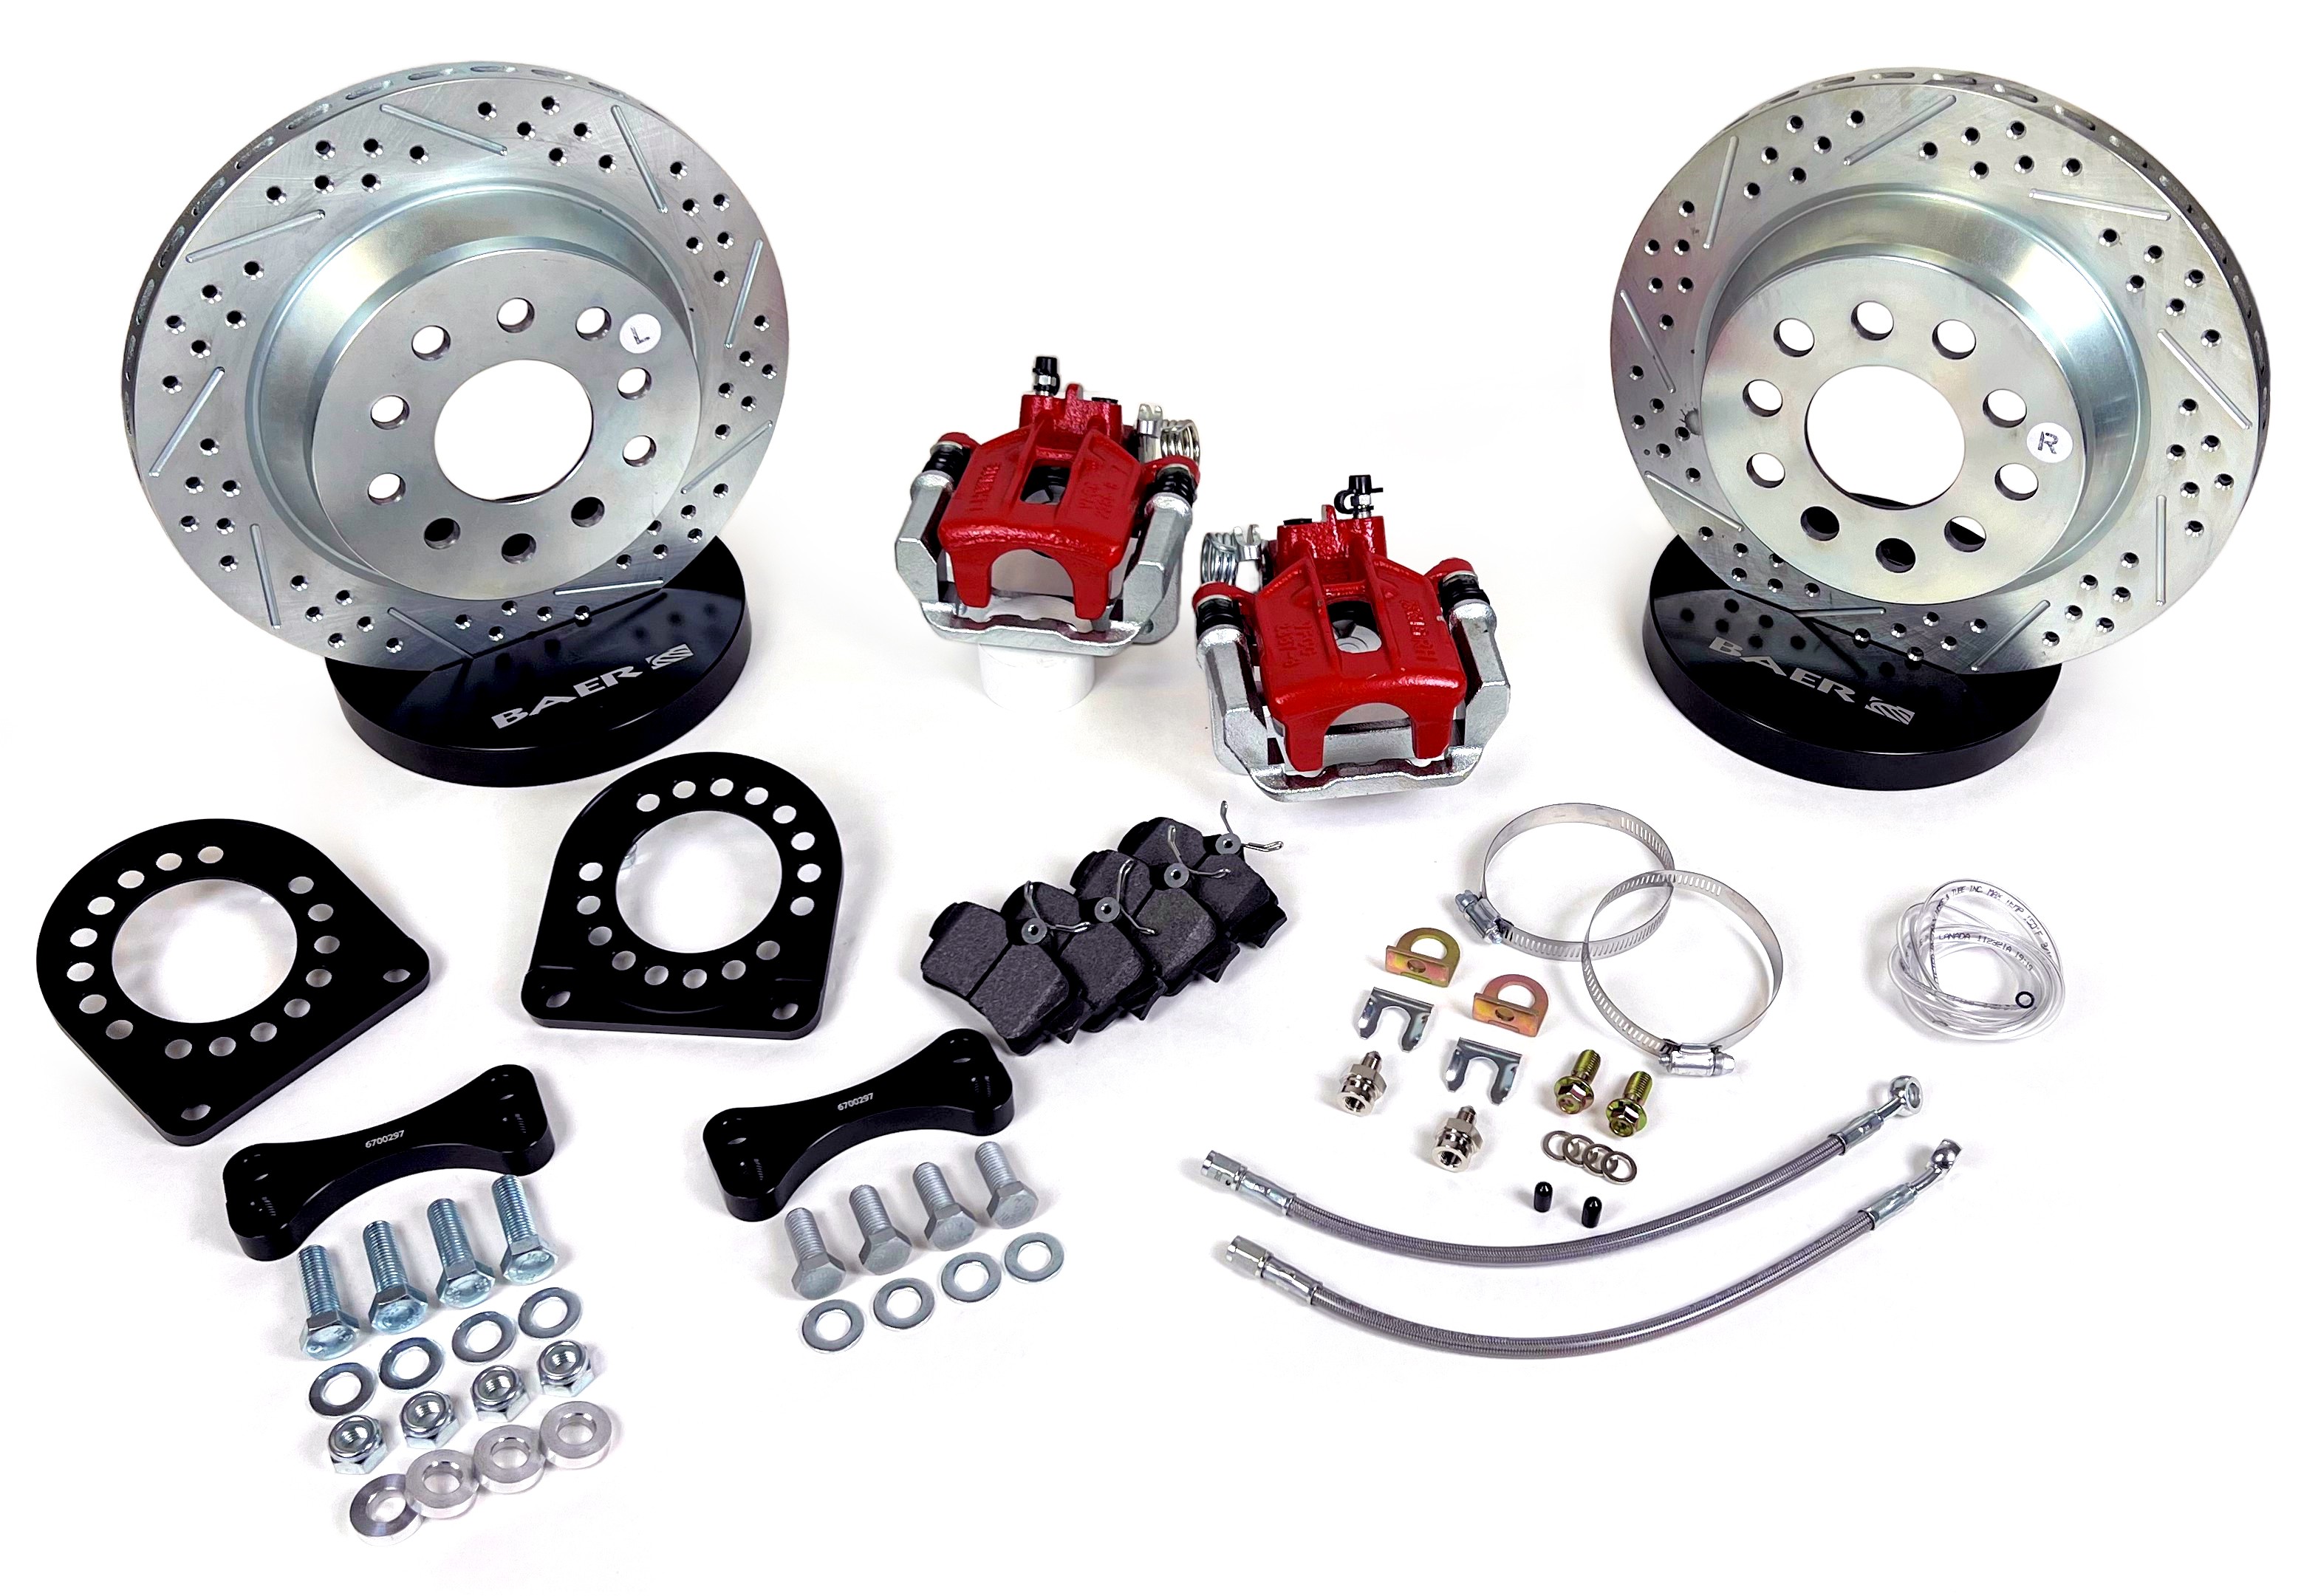 11.65" Classic Series (NON-Staggered Shocks) Brake System with Park Brake    